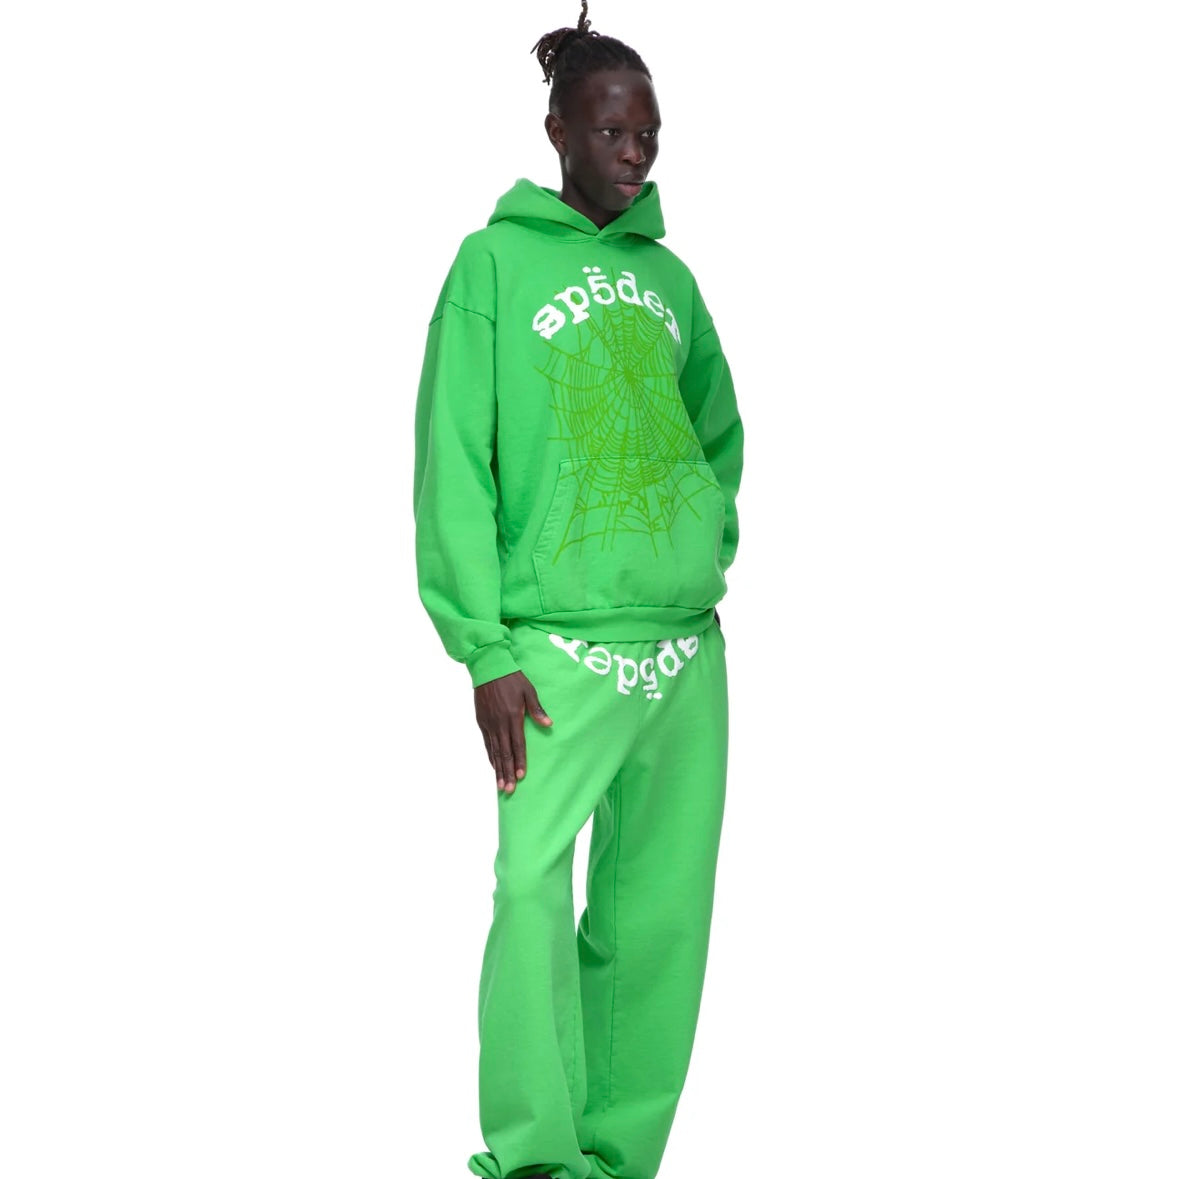 Sp5der Green White Legacy Hoodie On Body Full Outfit